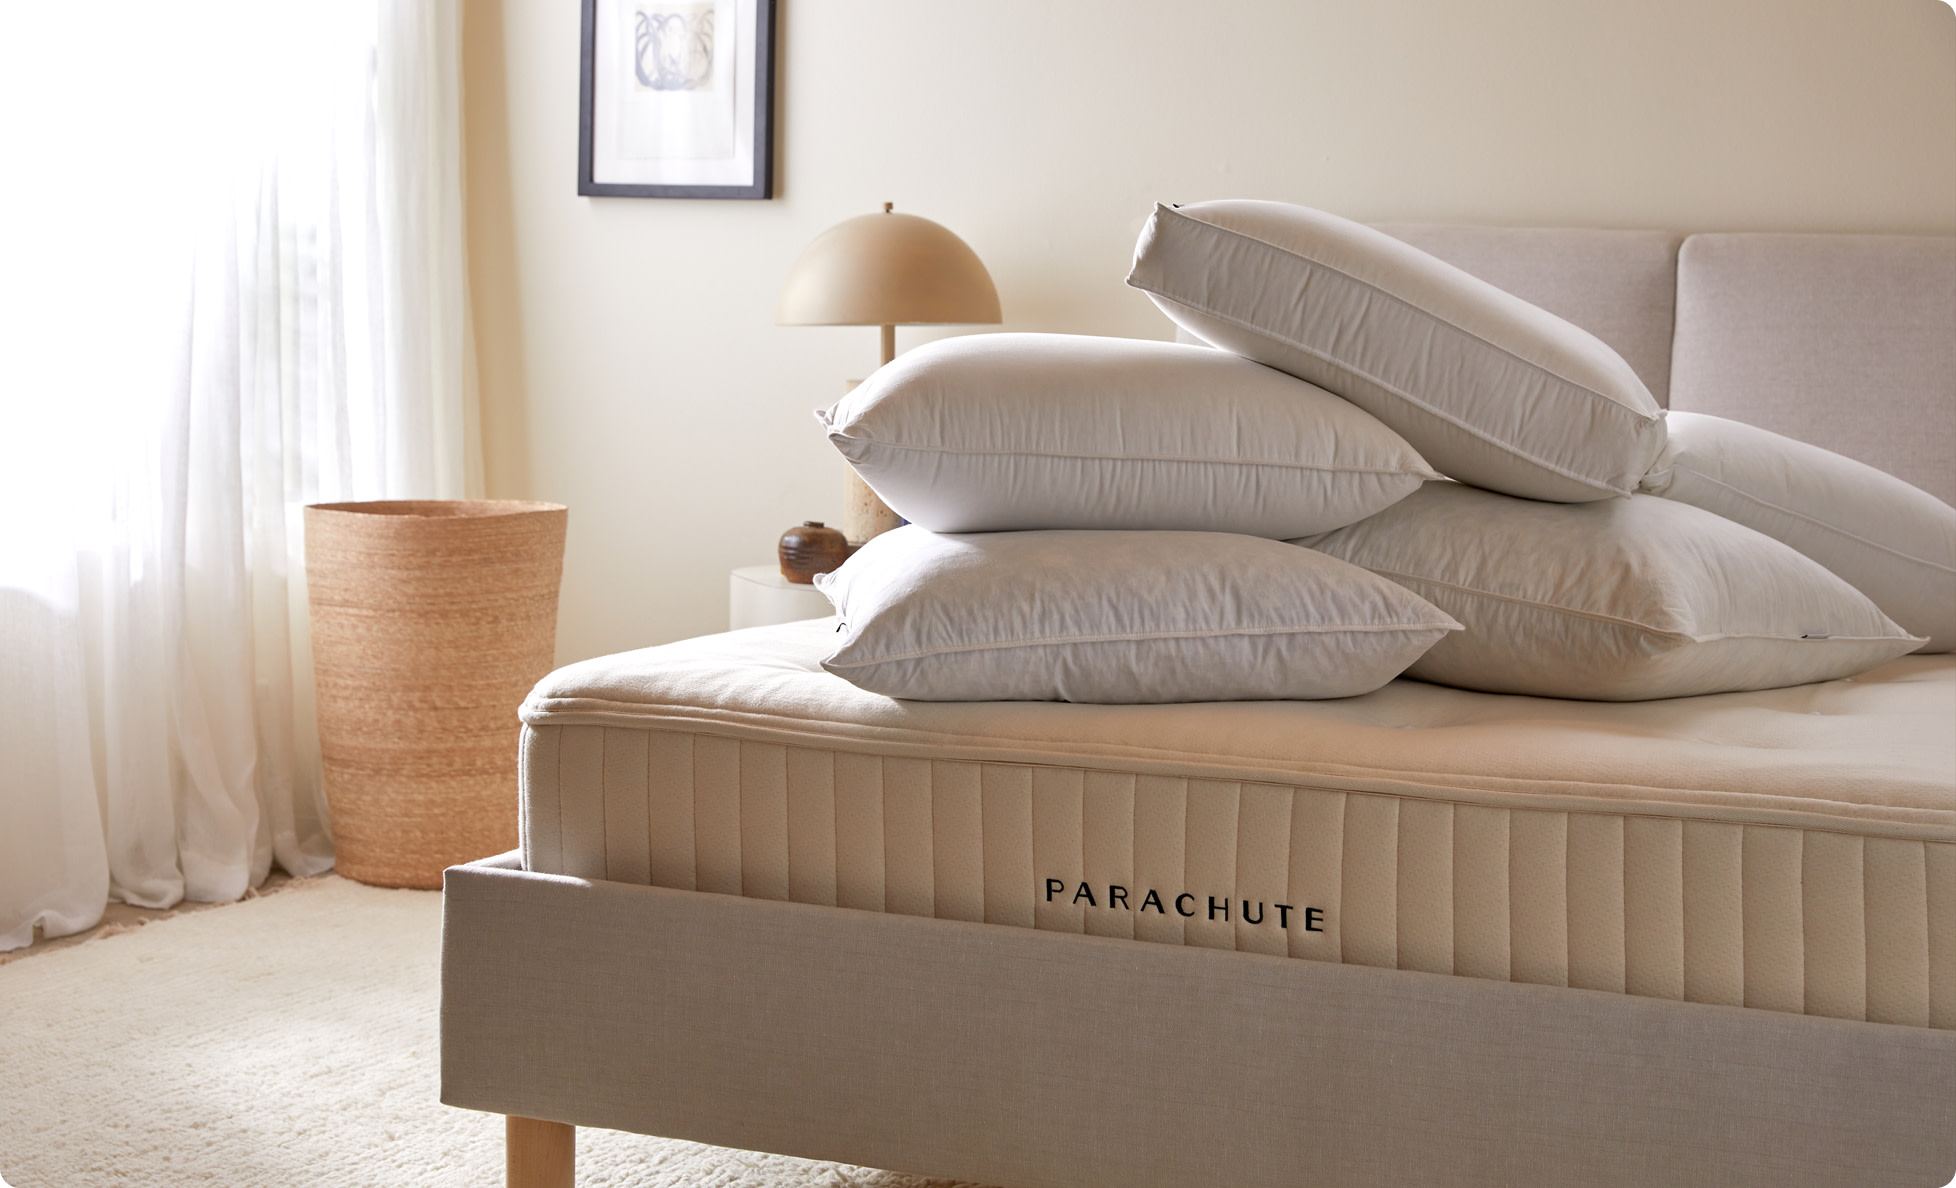 Pillow inserts stacked on a bare mattress